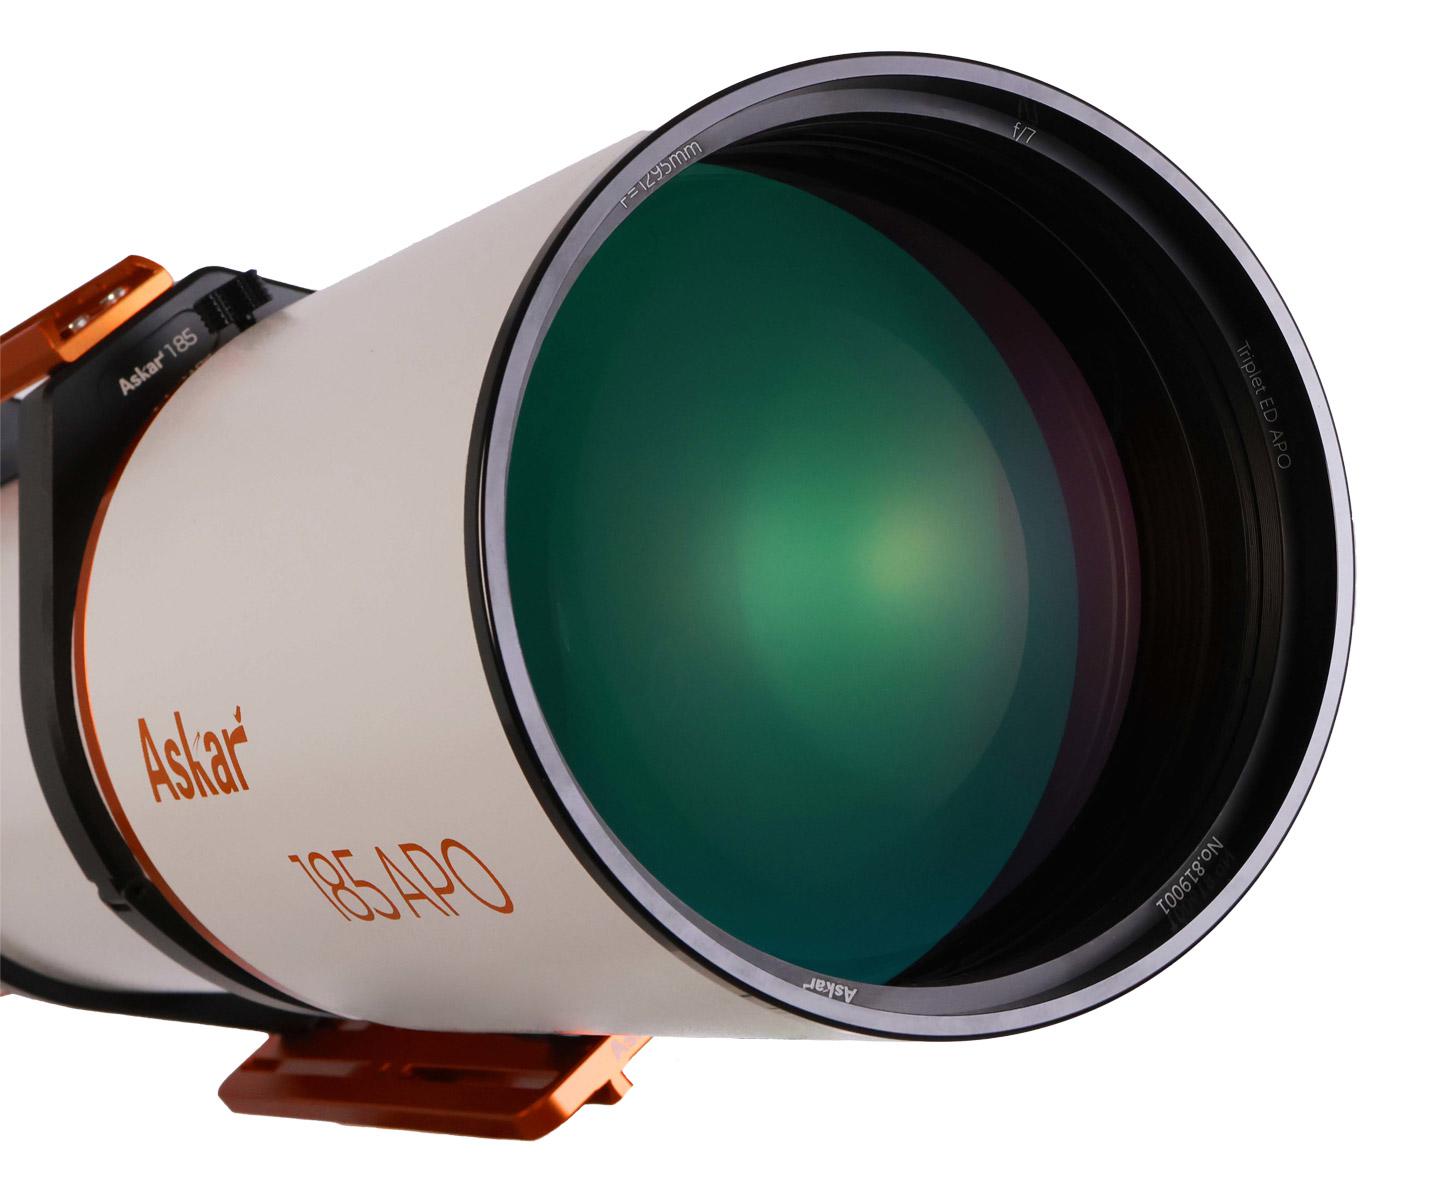  The Askar 185APO is an apo refractor with 185 mm aperture, 1295 mm focal length and a focal ratio of 1:7 with many practical features. [EN] 